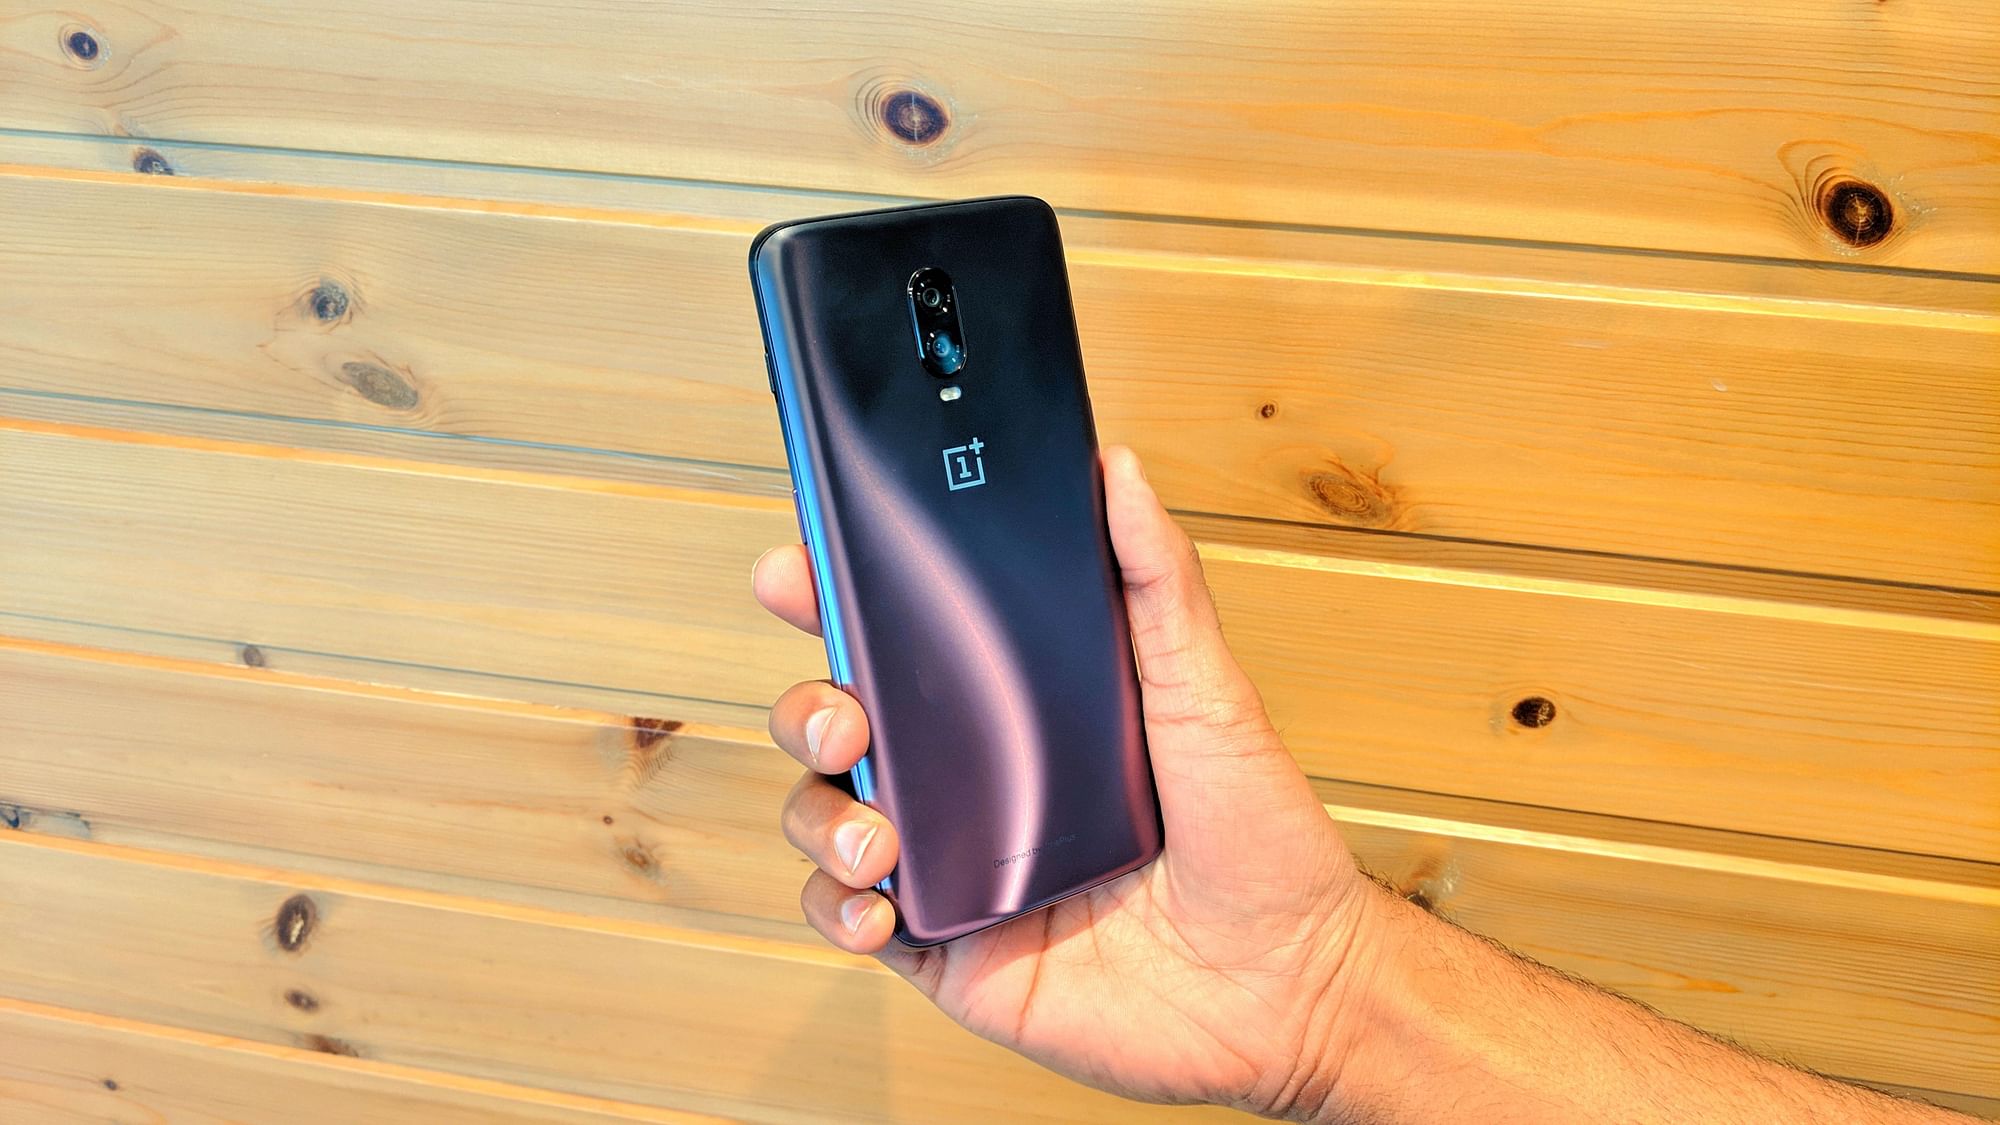 OnePlus 6T Thunder Purple variant now available in India.&nbsp;